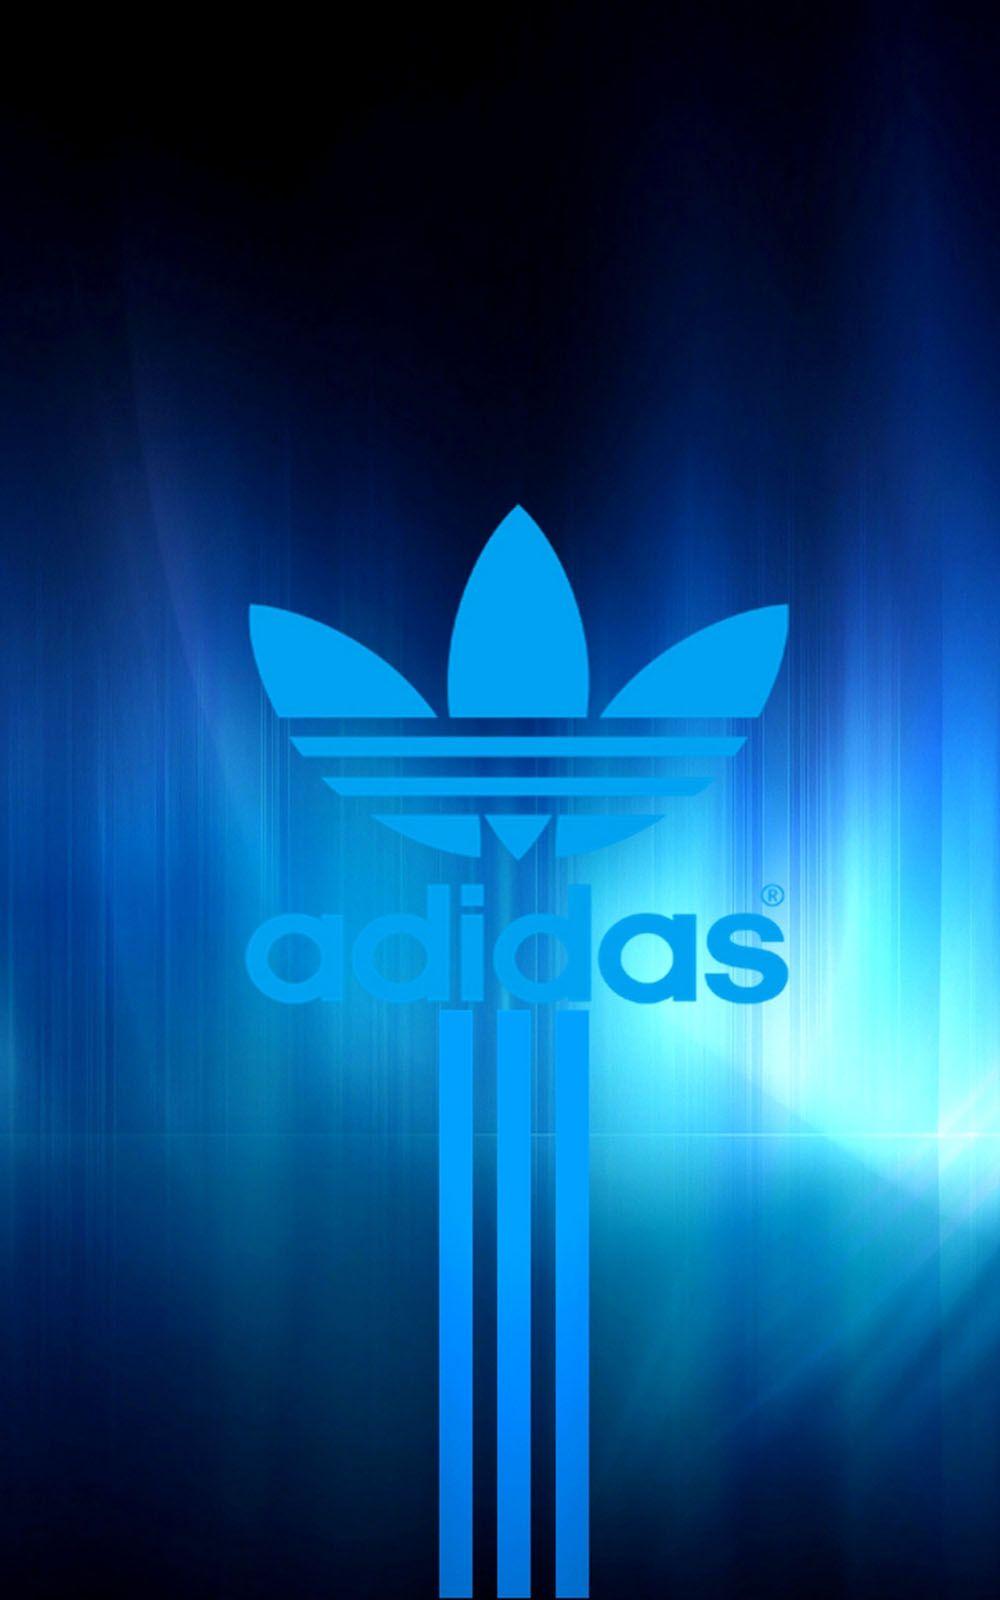 Adidas Android Wallpapers - Top Free Adidas Android Backgrounds ...